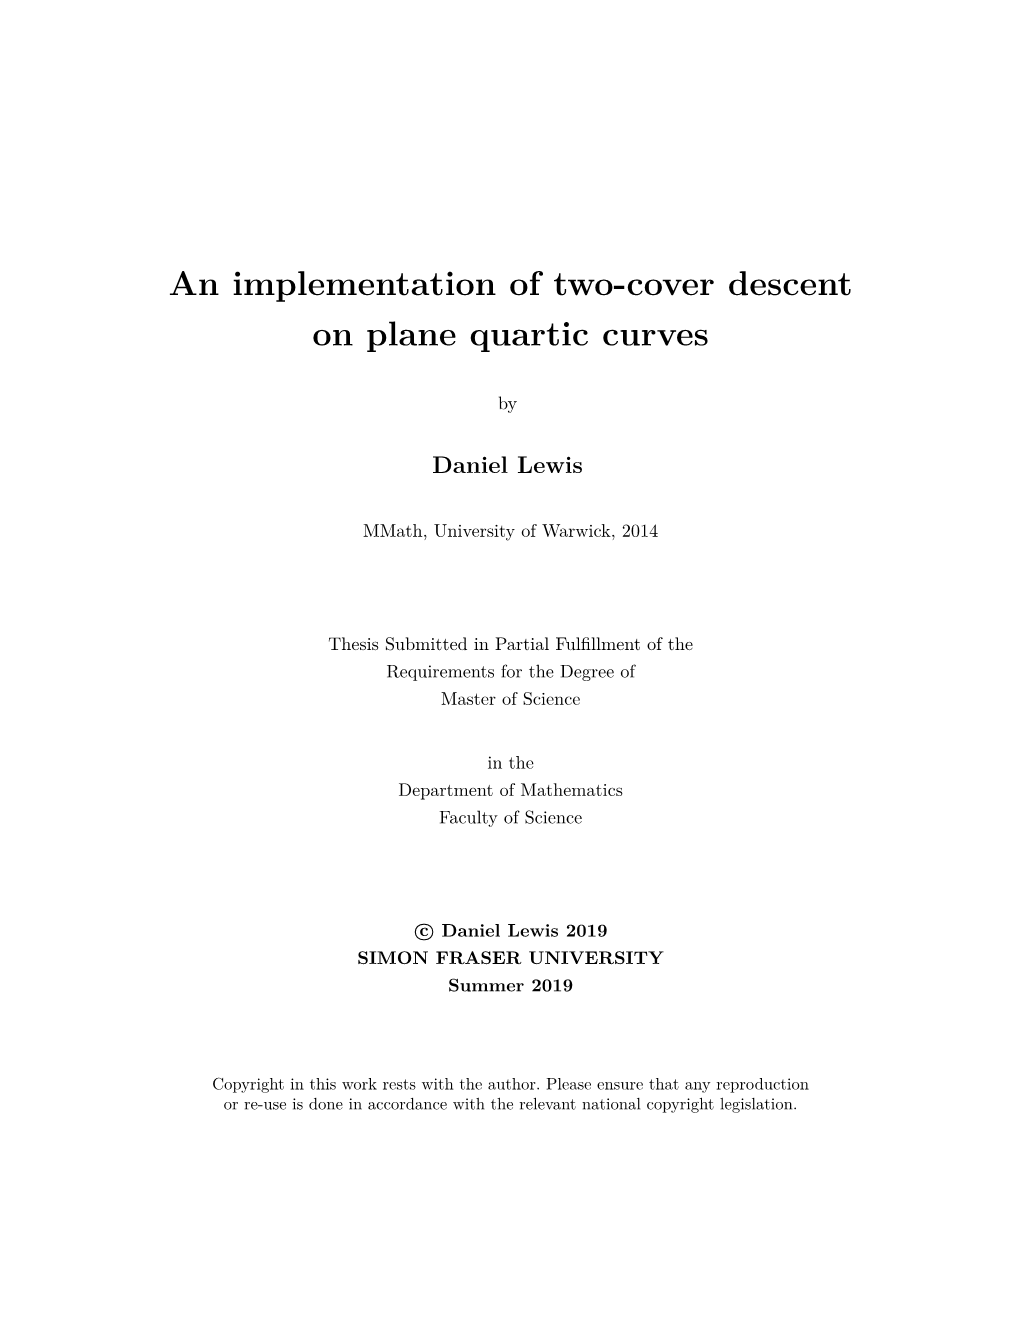 An Implementation of Two-Cover Descent on Plane Quartic Curves